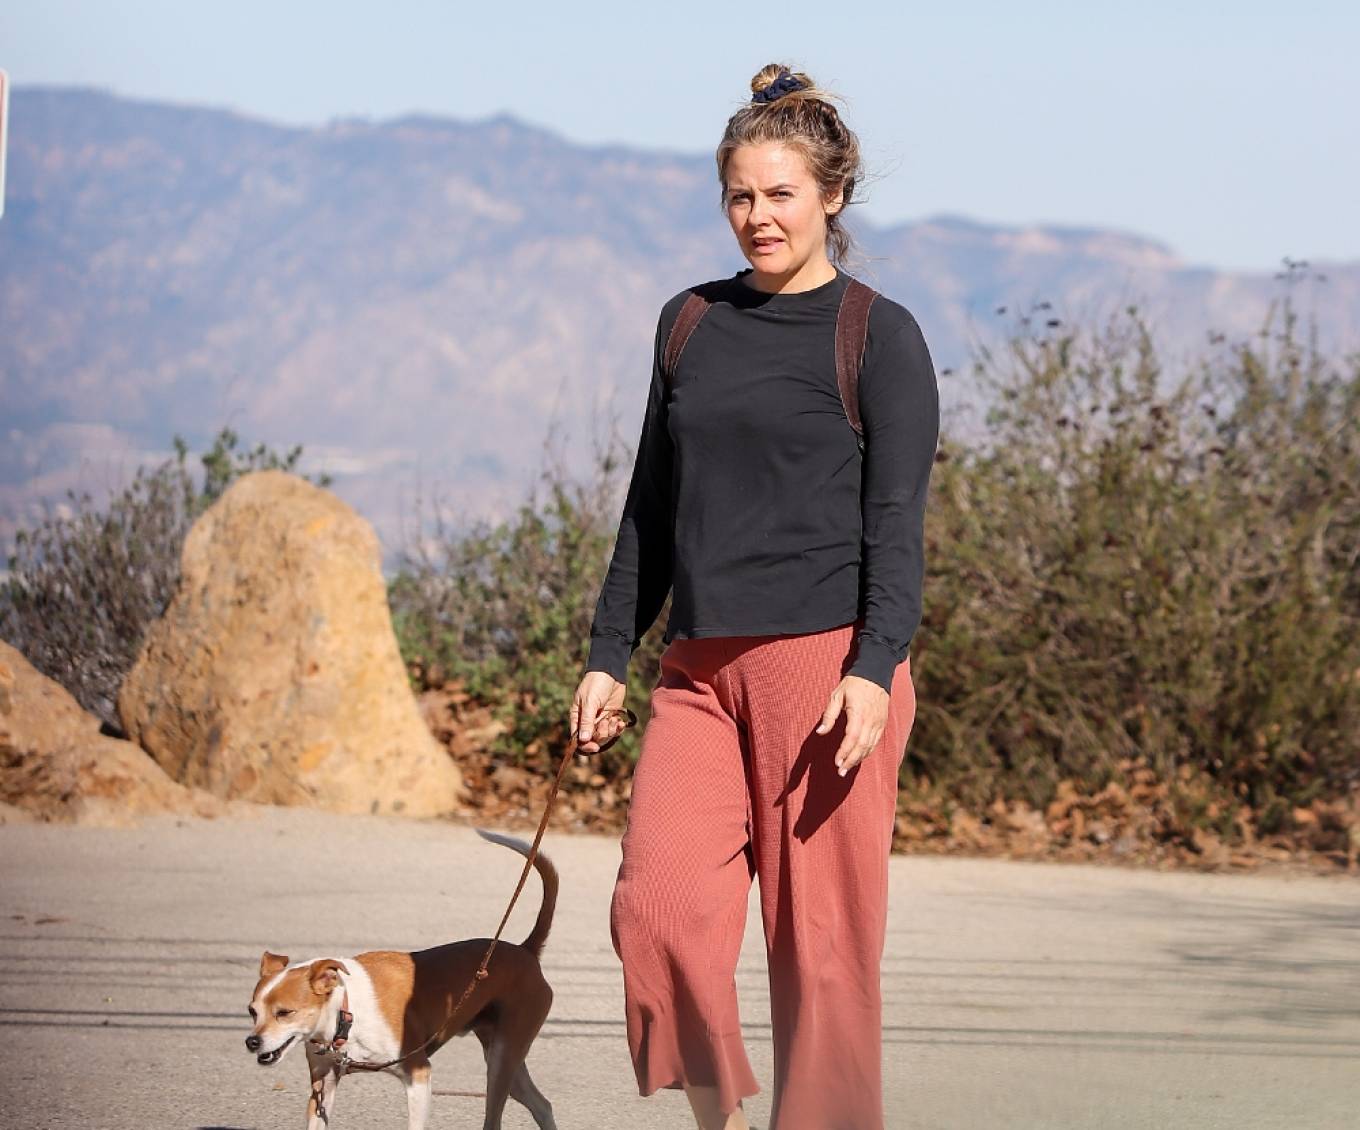 Alicia Silverstone 2021 : Alicia Silverstone – Seen while takes her dog for a walk-04